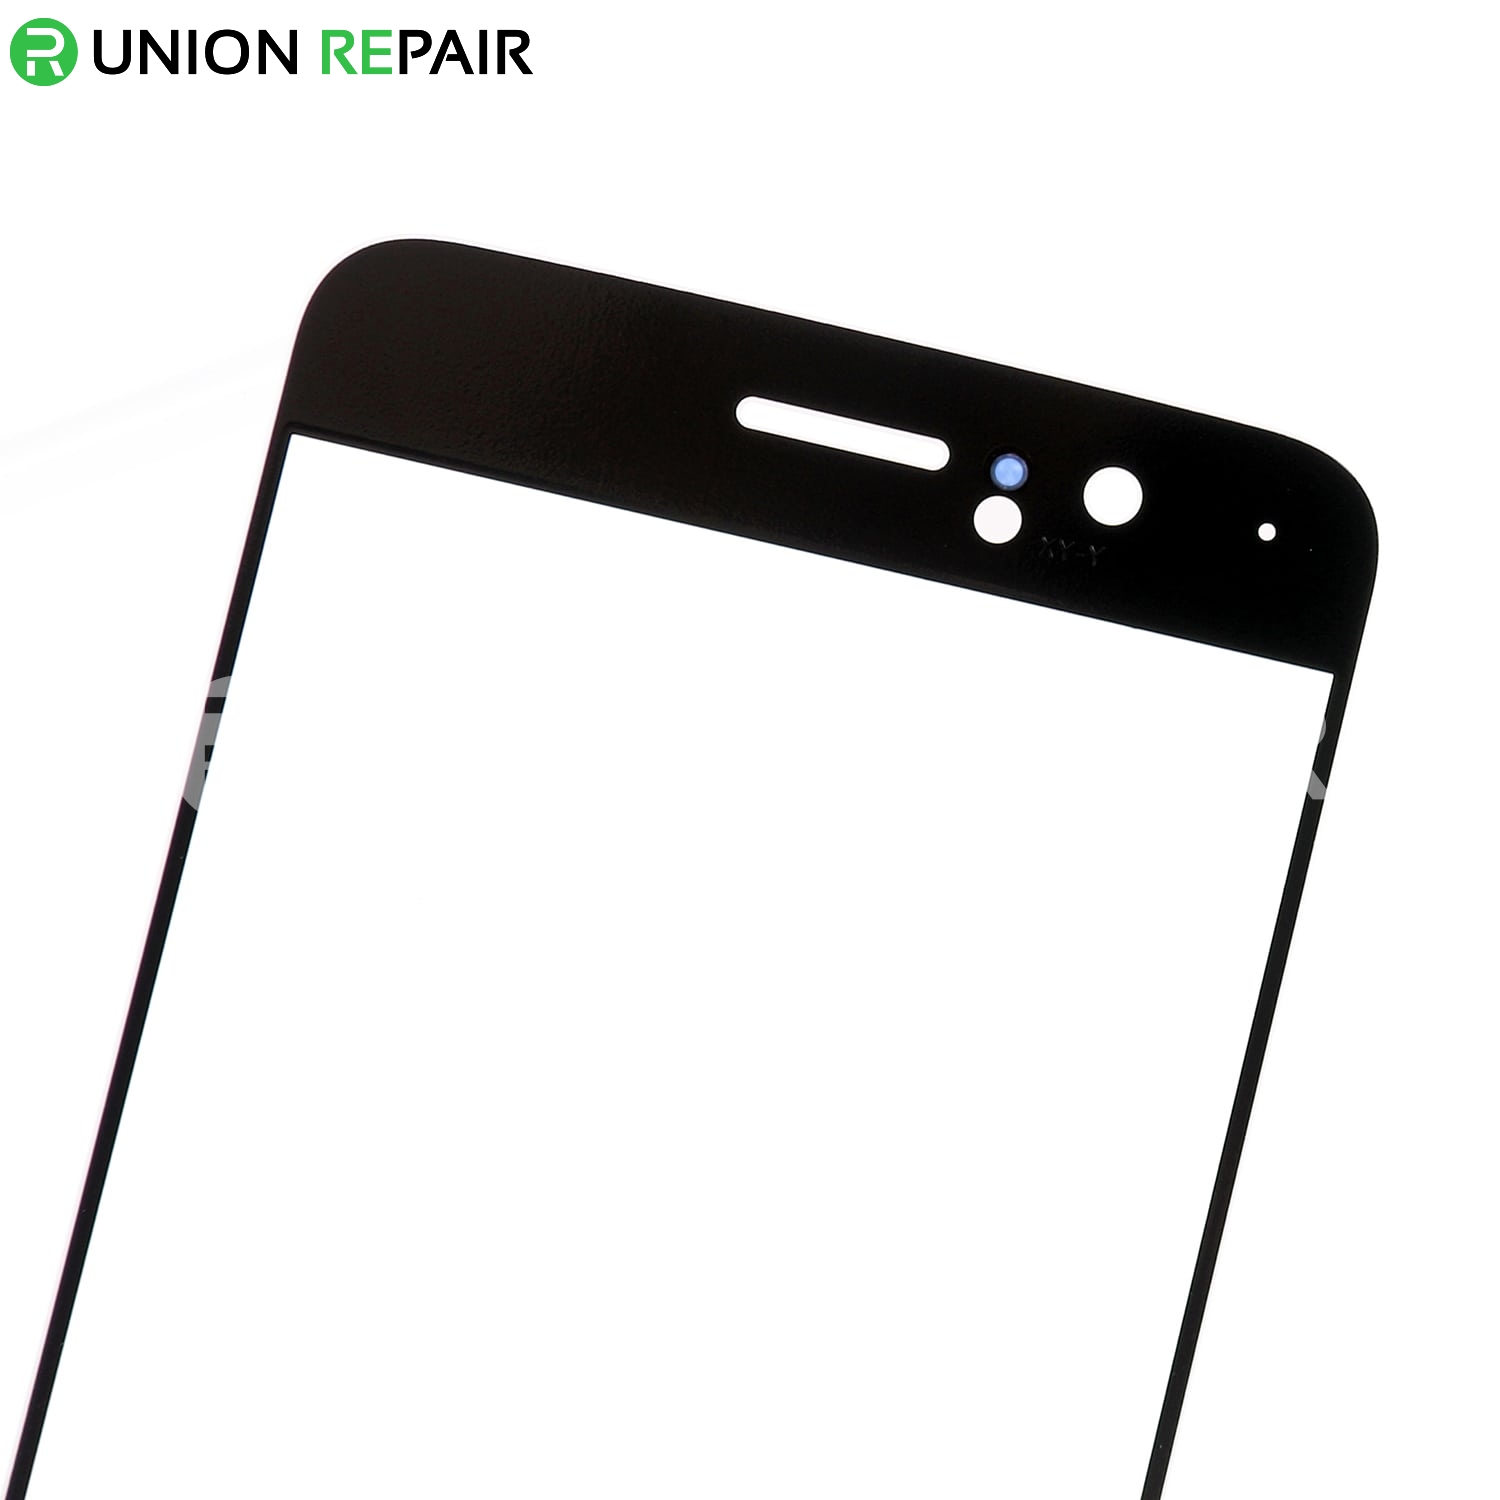 Replacement for OnePlus 5 Front Glass Lens - White